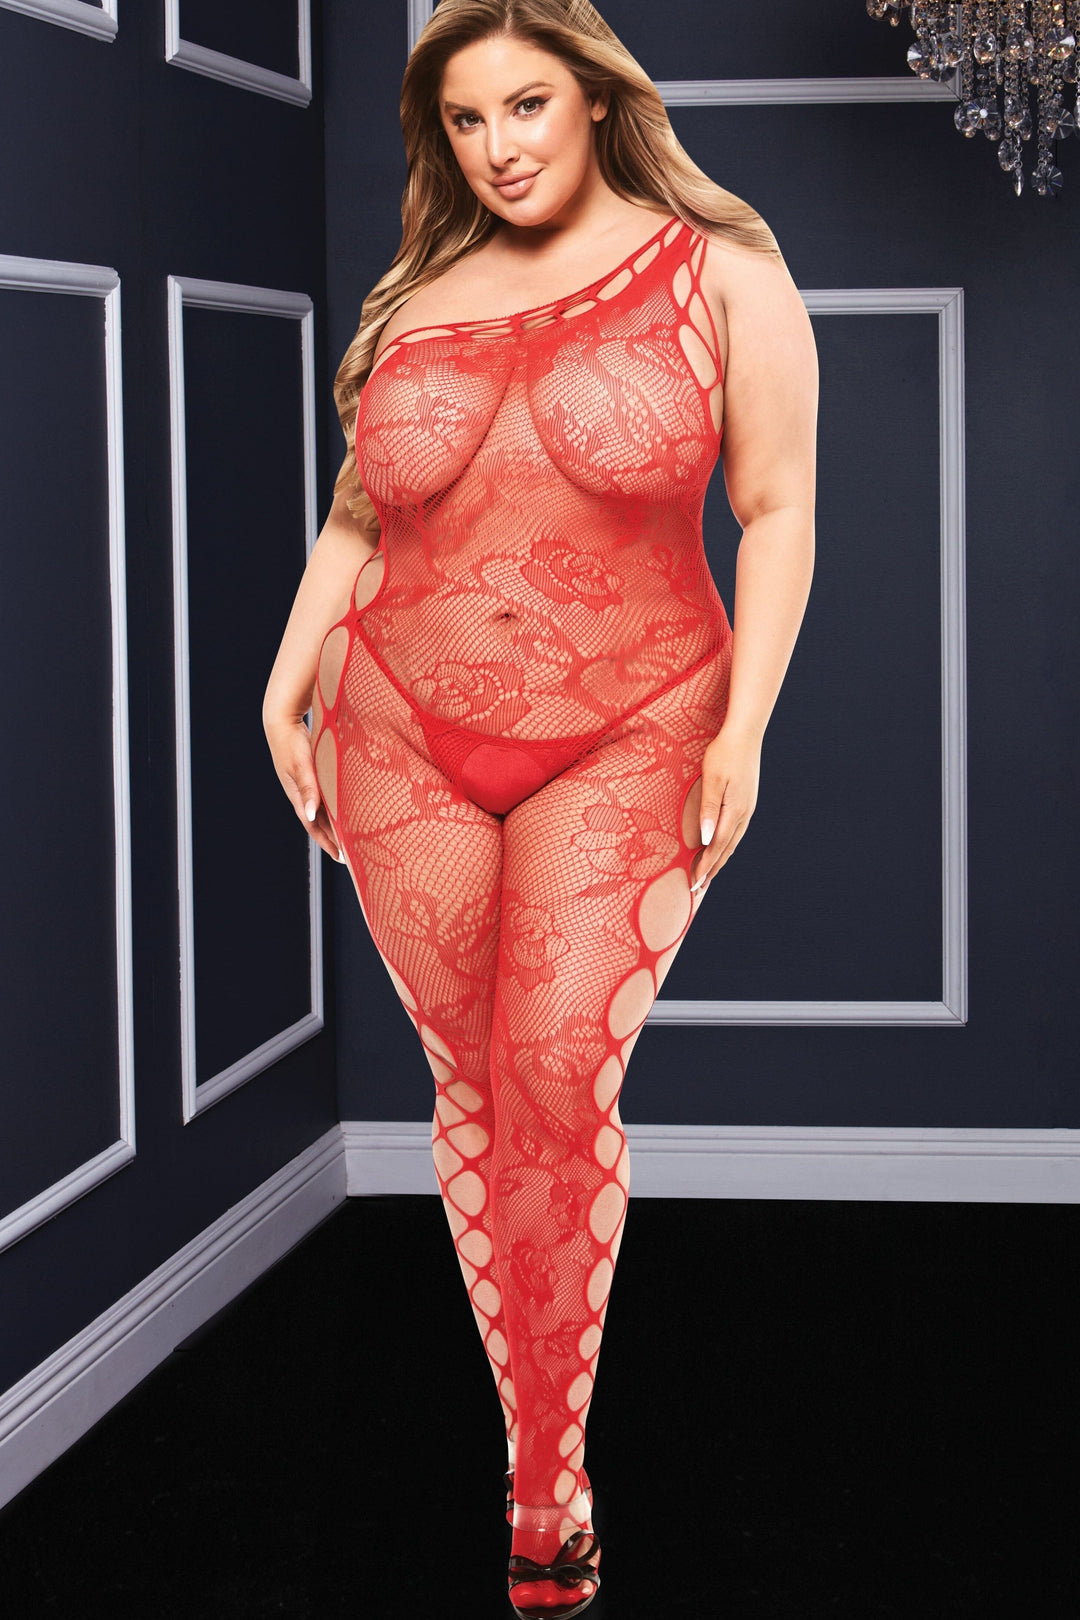 Off The Shoulder Bodystocking | Plus Size-Bodystockings-Baci Lingerie-Red-Q-SEXYSHOES.COM